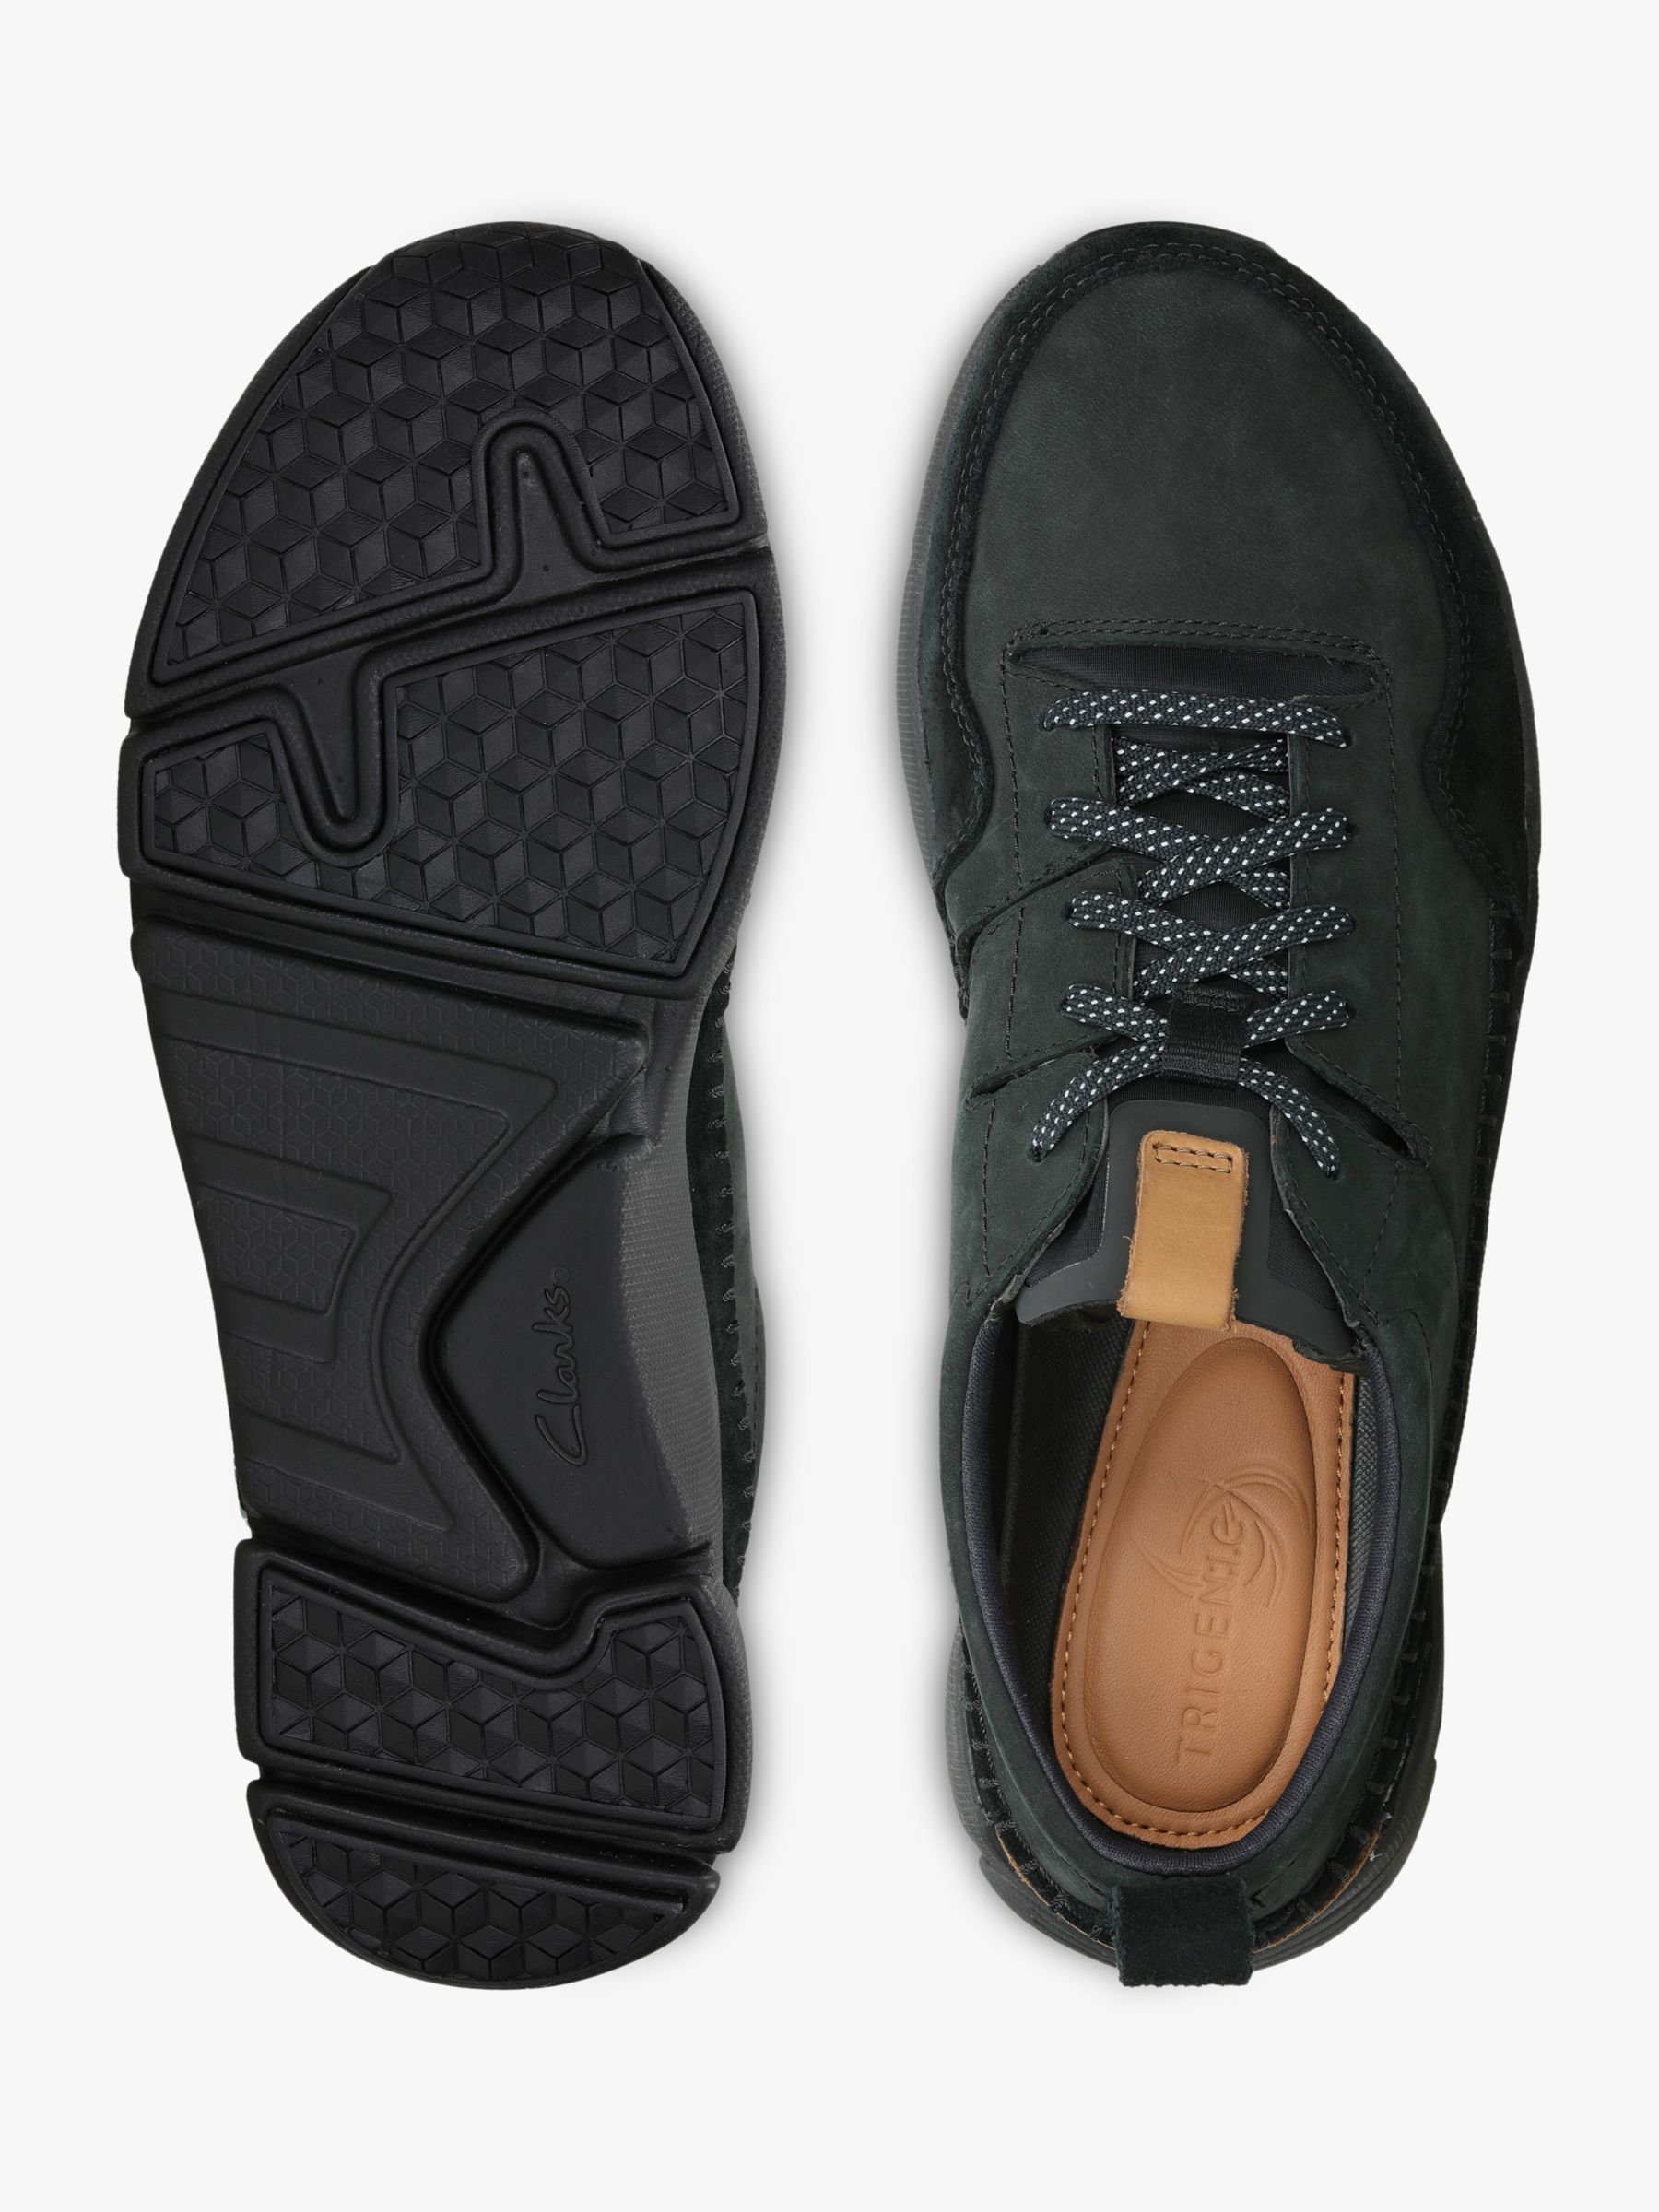 Clarks TriActive Run Leather Trainers, Black